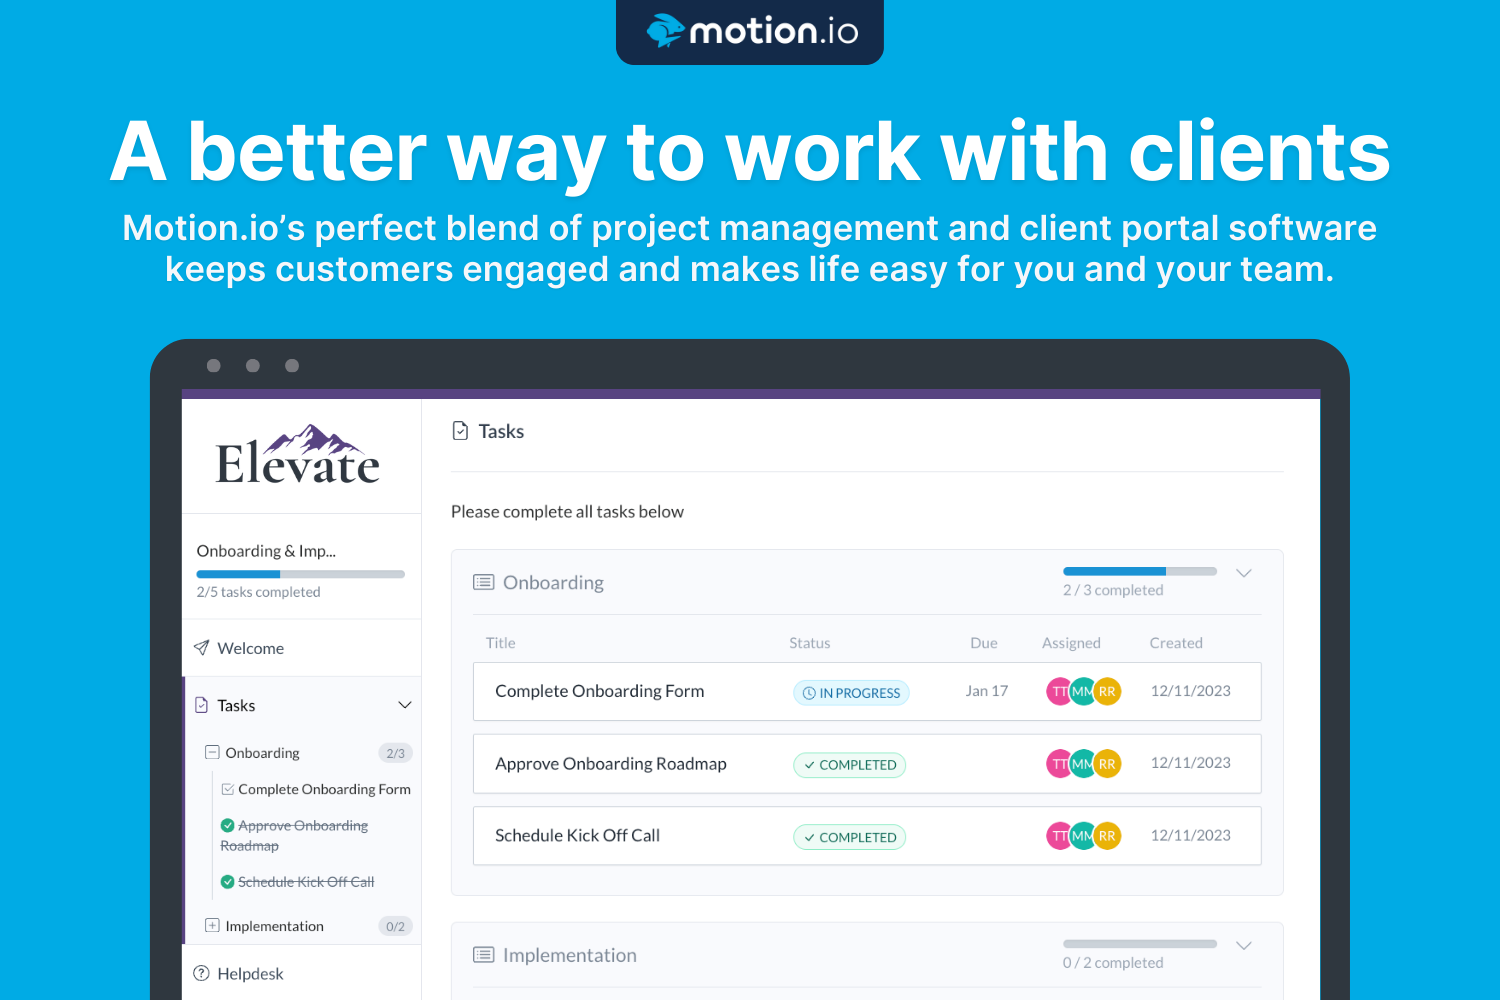 Motion.io’s perfect blend of project management and client portal software keeps customers engaged and makes life easy for you and your team.